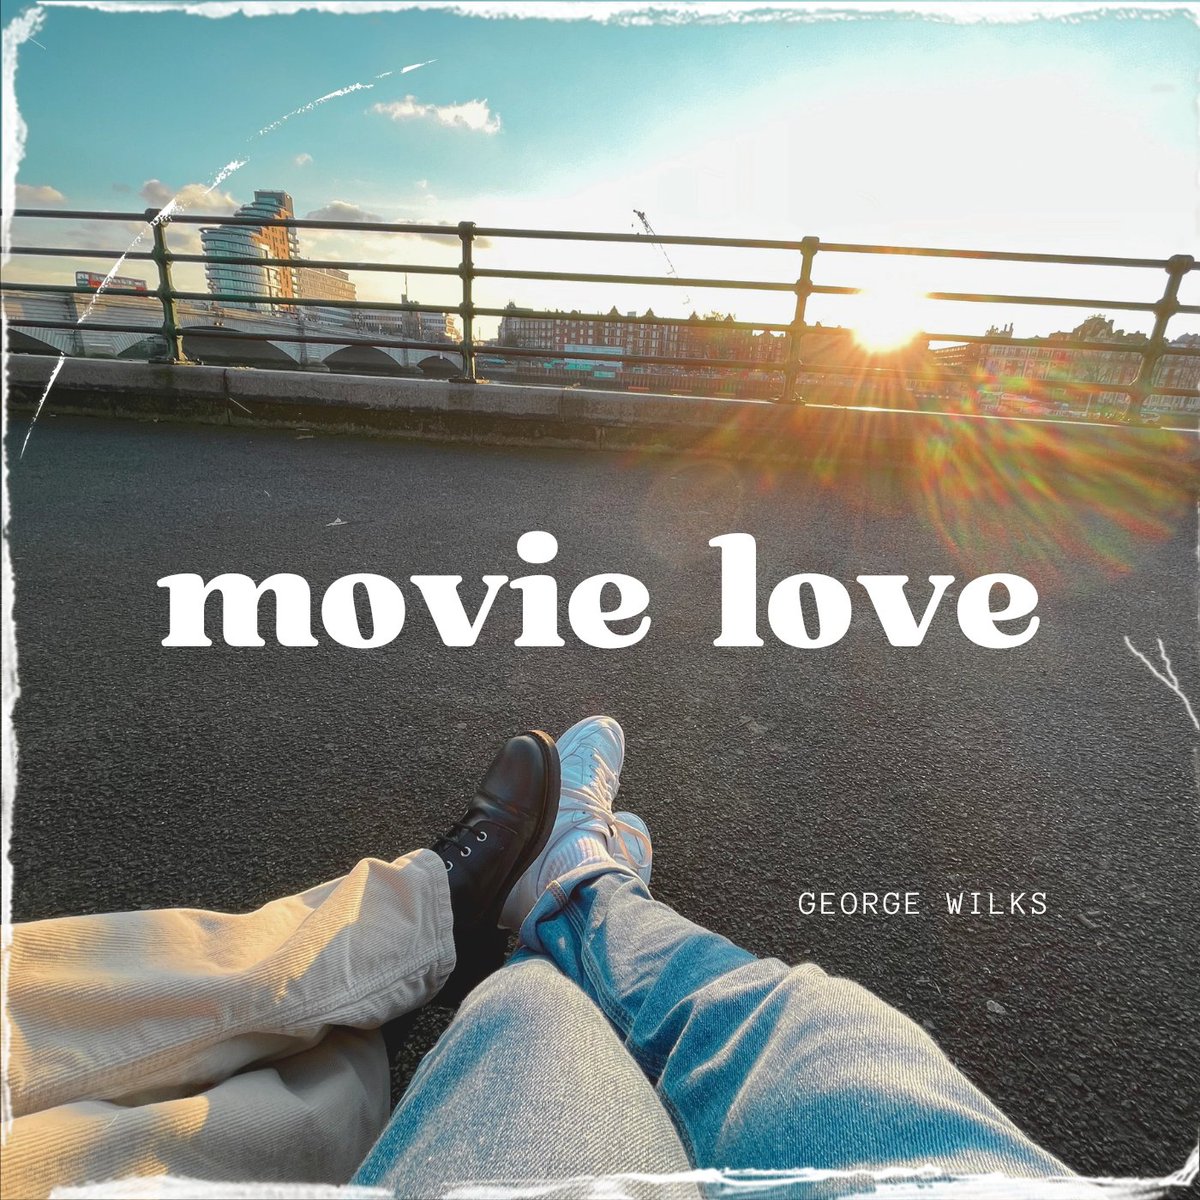 Movie Love - OUT NOW! Listen here ⬇️ georgewilks.com/movie-love-play Clarity EP coming soon - 13th October Pre-save link in bio